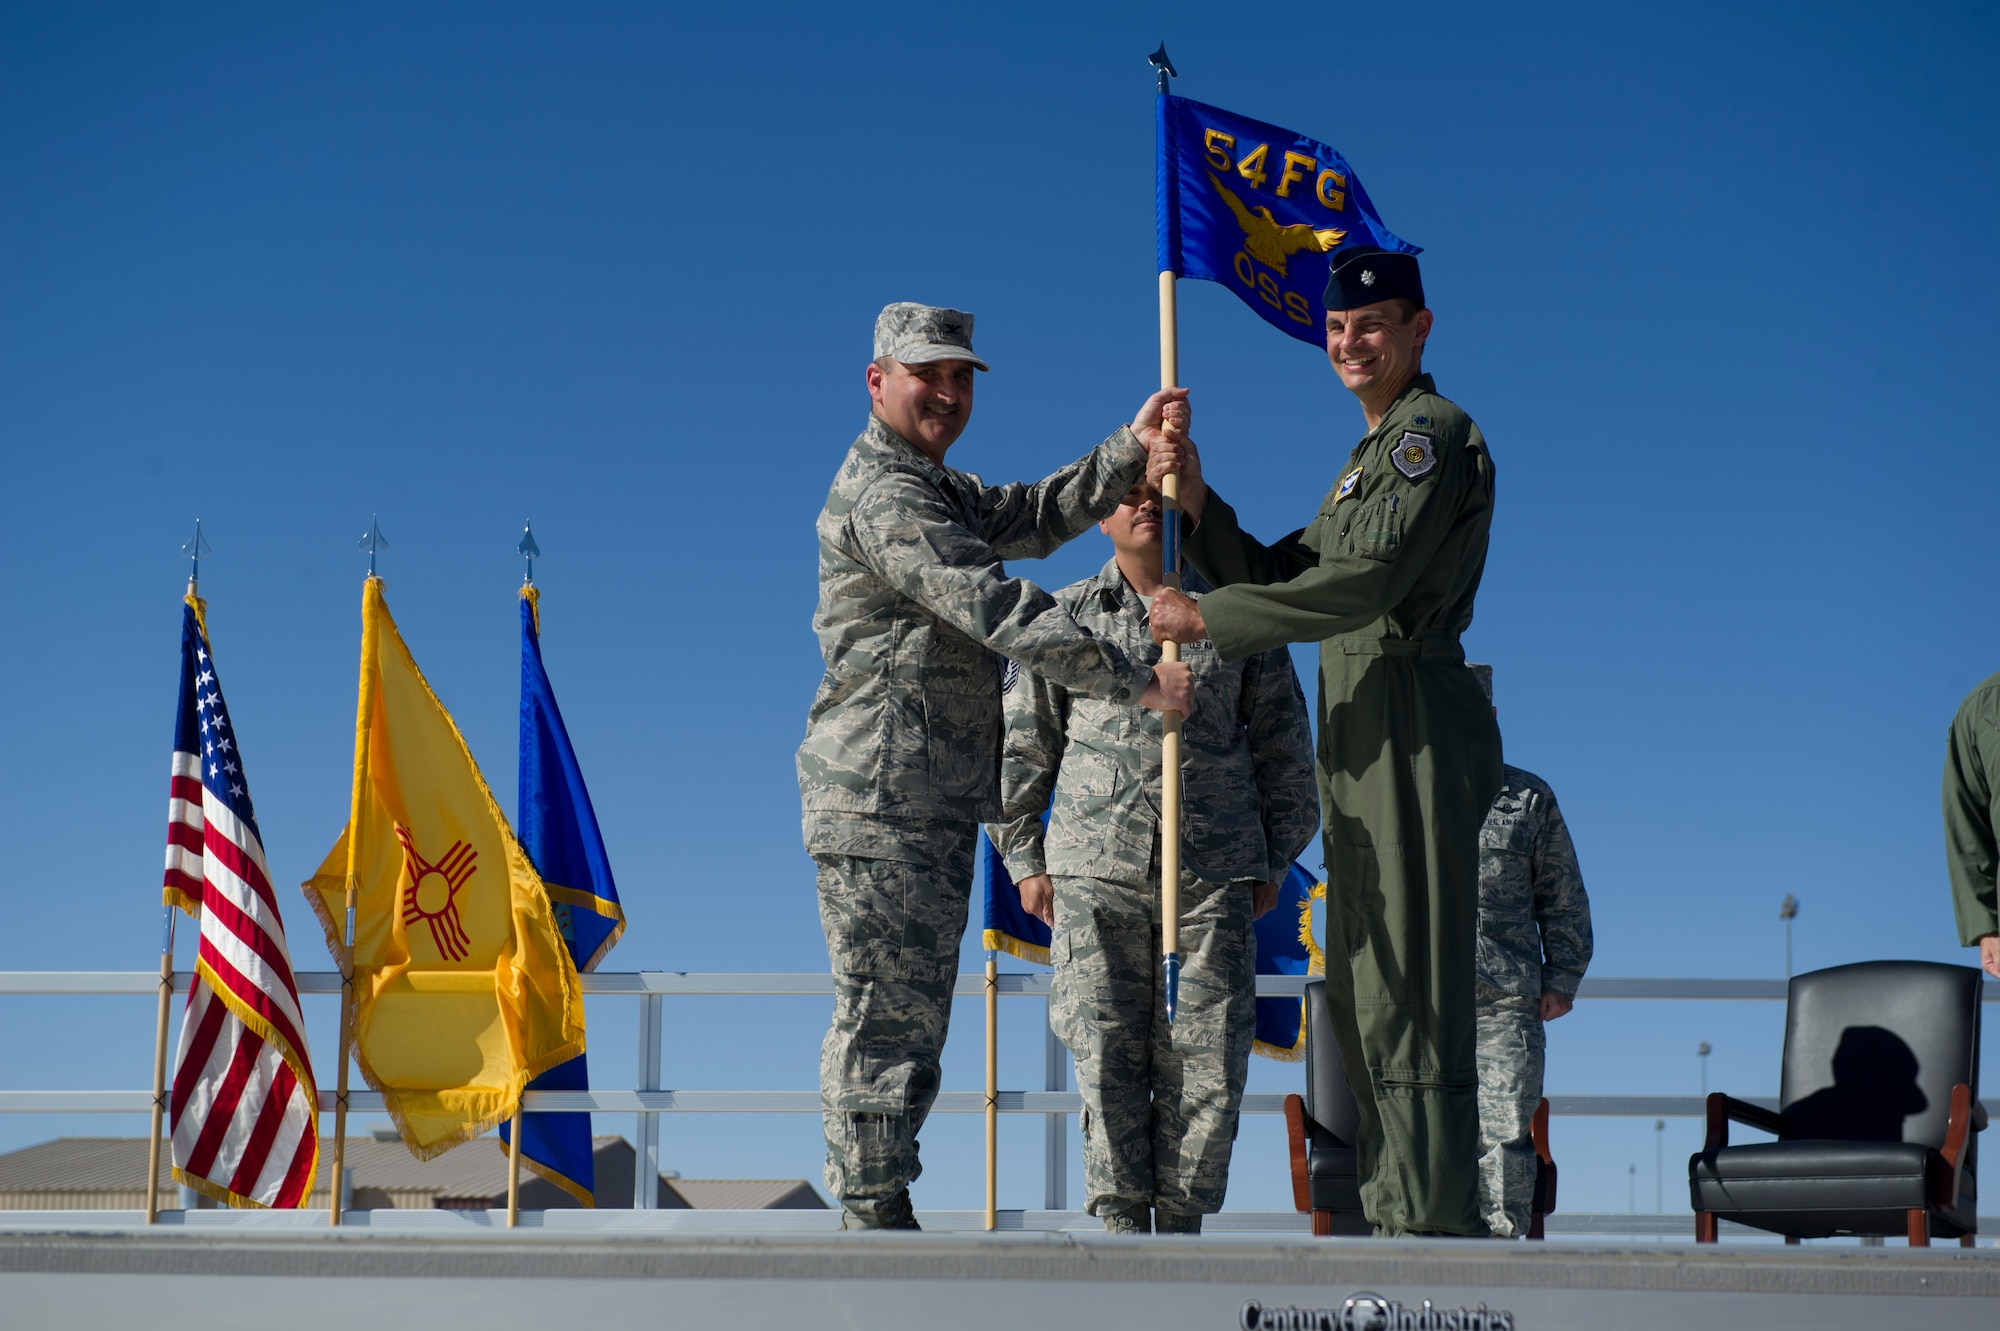 Col. Rodney Petithomme, 54th Fighter Group commander, passes the guidon of the 54th Operations Support Squadron to Lt. Col. Marshall Chalverus during the 54th Fighter Group activation ceremony at Holloman Air Force Base, N.M., March 11. The 54th Fighter Group, a tenant unit at Holloman, is a detachment the 56th Fighter Wing at Luke Air Force Base, Ariz., and will ultimately operate two F-16 Fighting Falcon aircraft training squadrons. The 54th Fighter Group plus three squadrons were activated at the ceremony: the 311th Fighter Squadron, the 54th Operations Support Squadron and the 54th Aircraft Maintenance Squadron. (U.S. Air Force photo by Airman 1st Class Chase A. Cannon/Released)